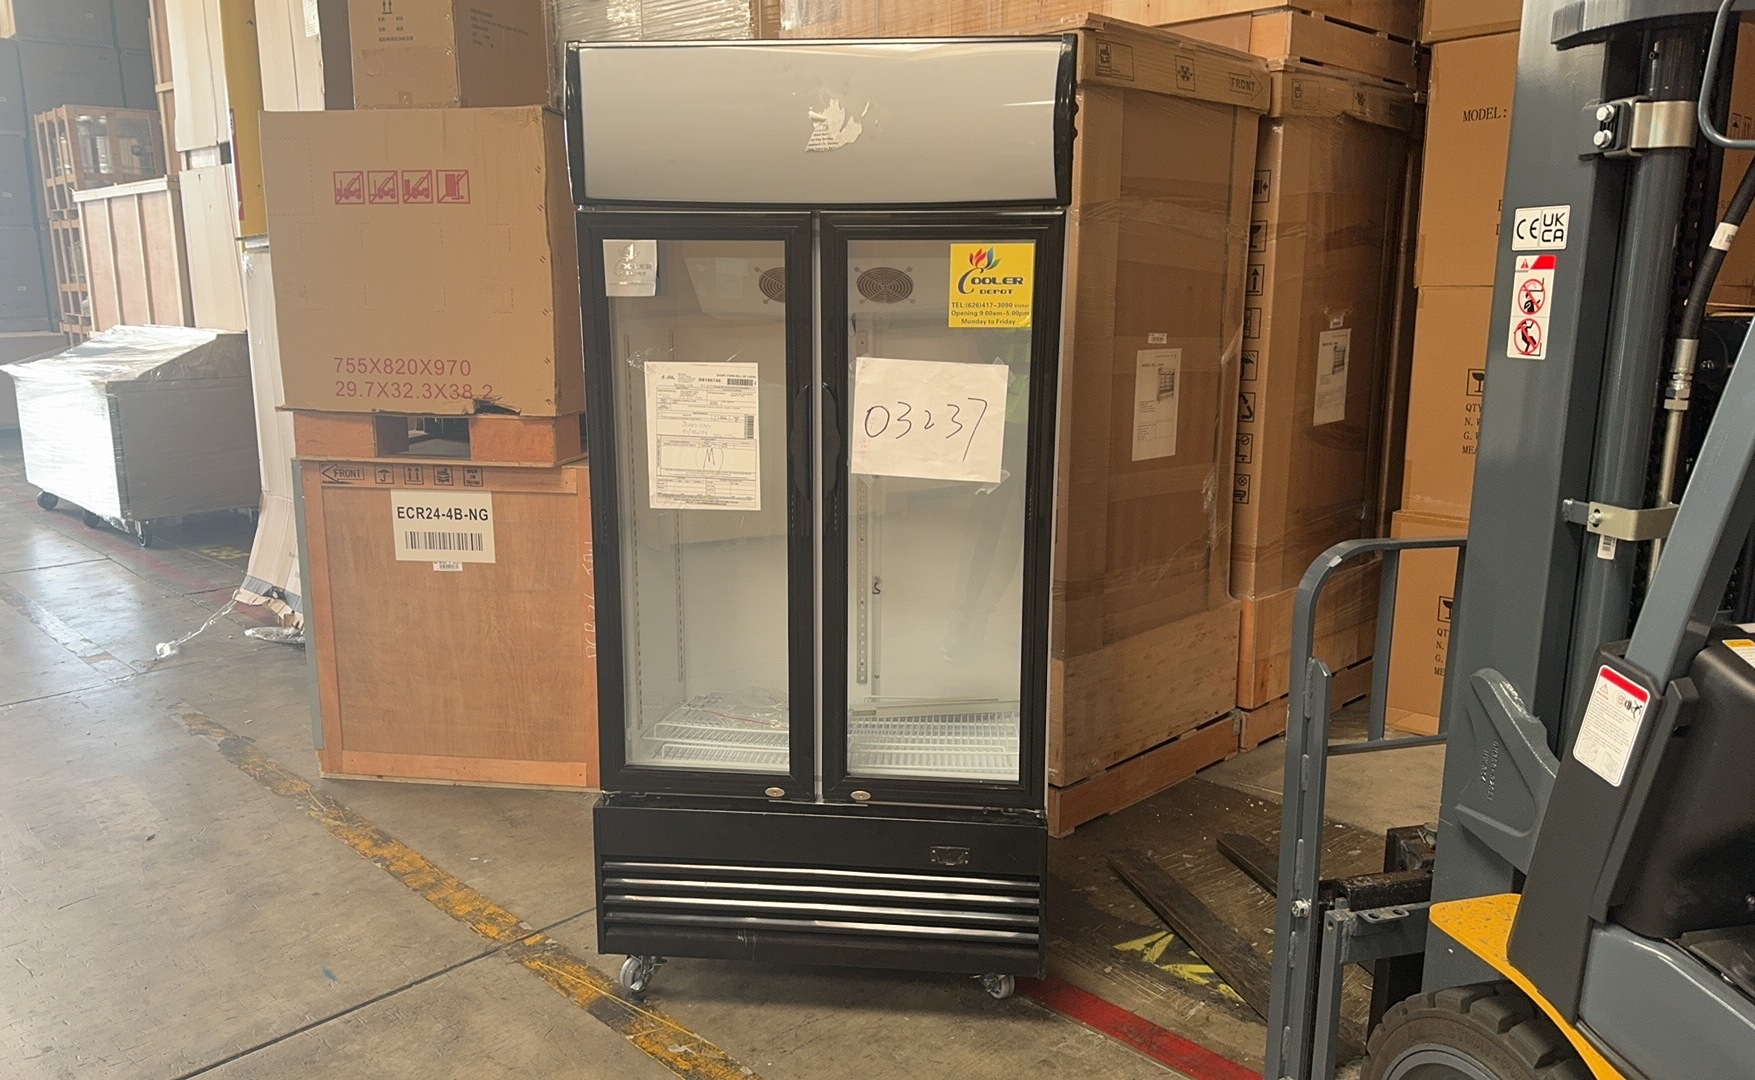 Clearance NSF 36 in two glass door upright refrigerator 03237